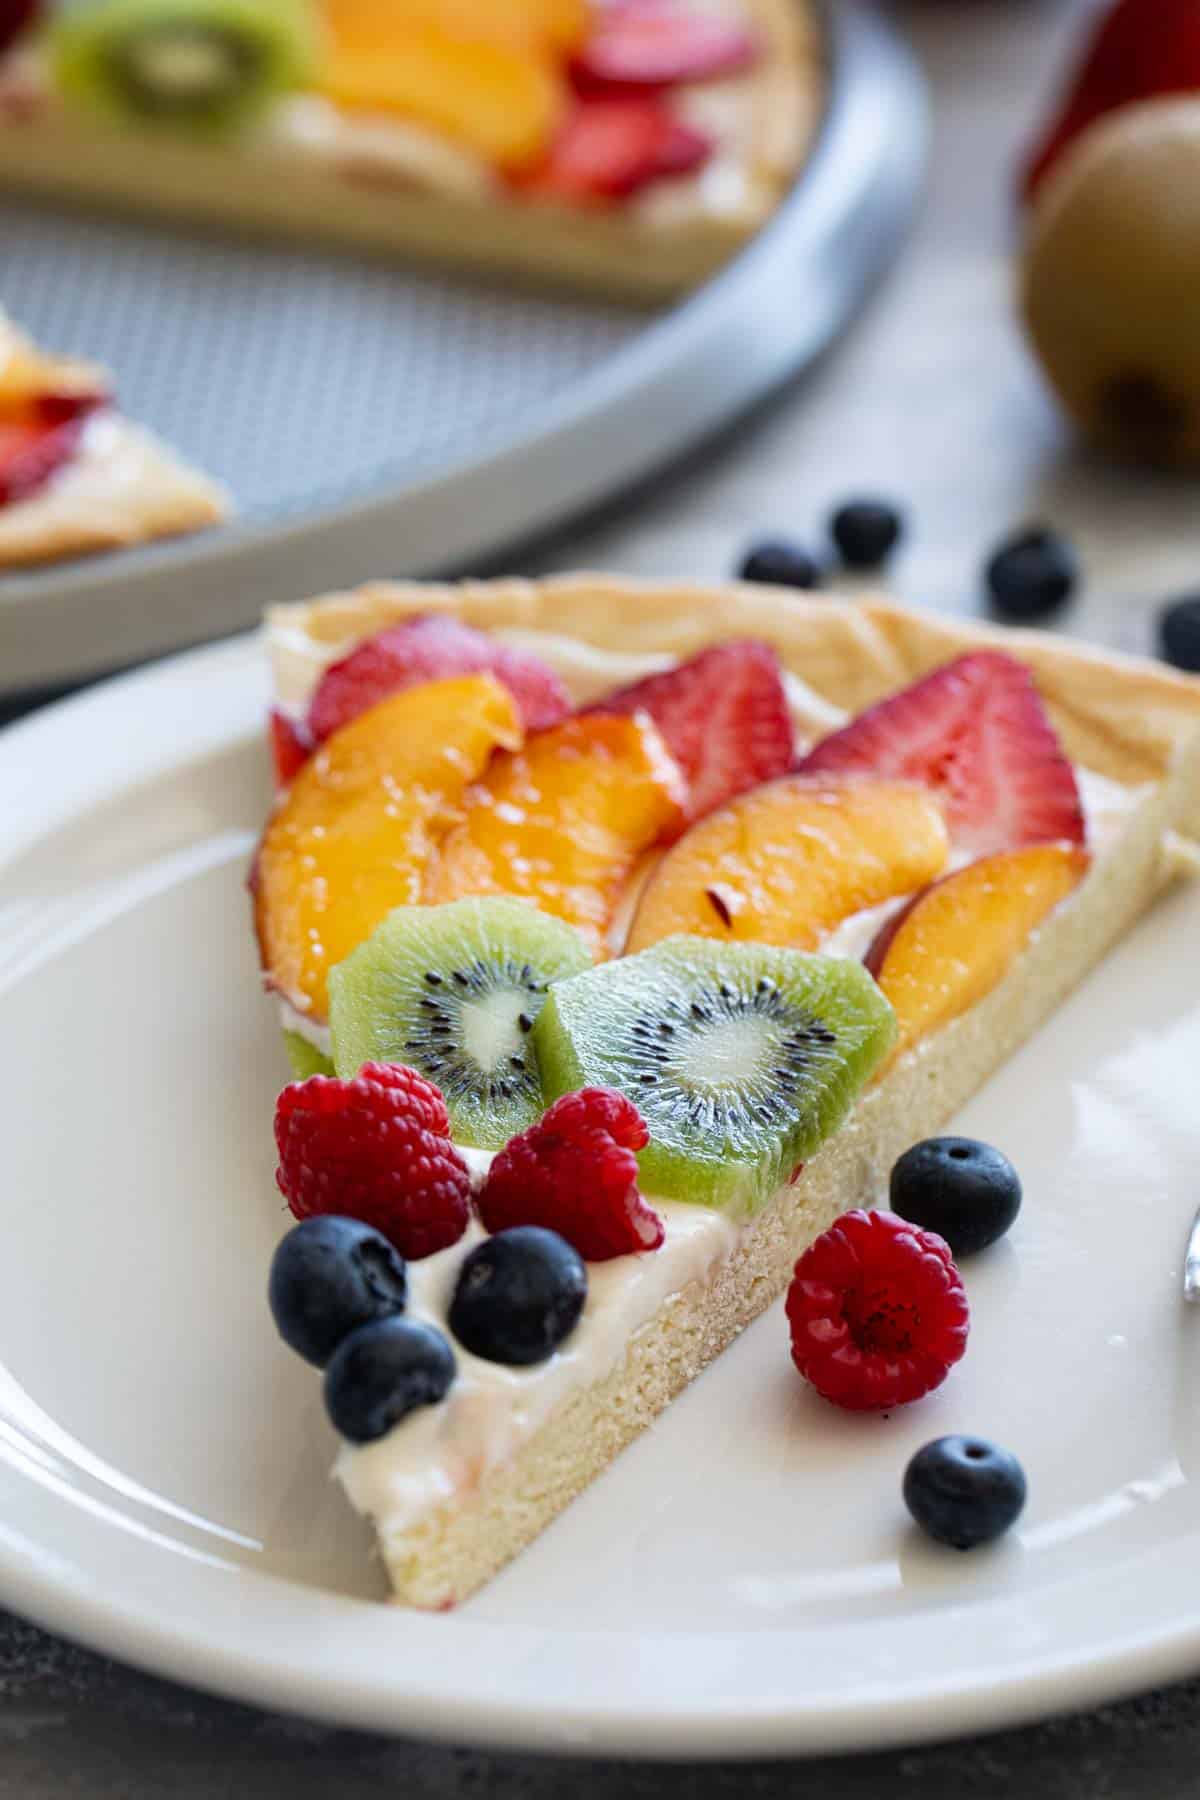 Slice of fruit pizza on a plate.